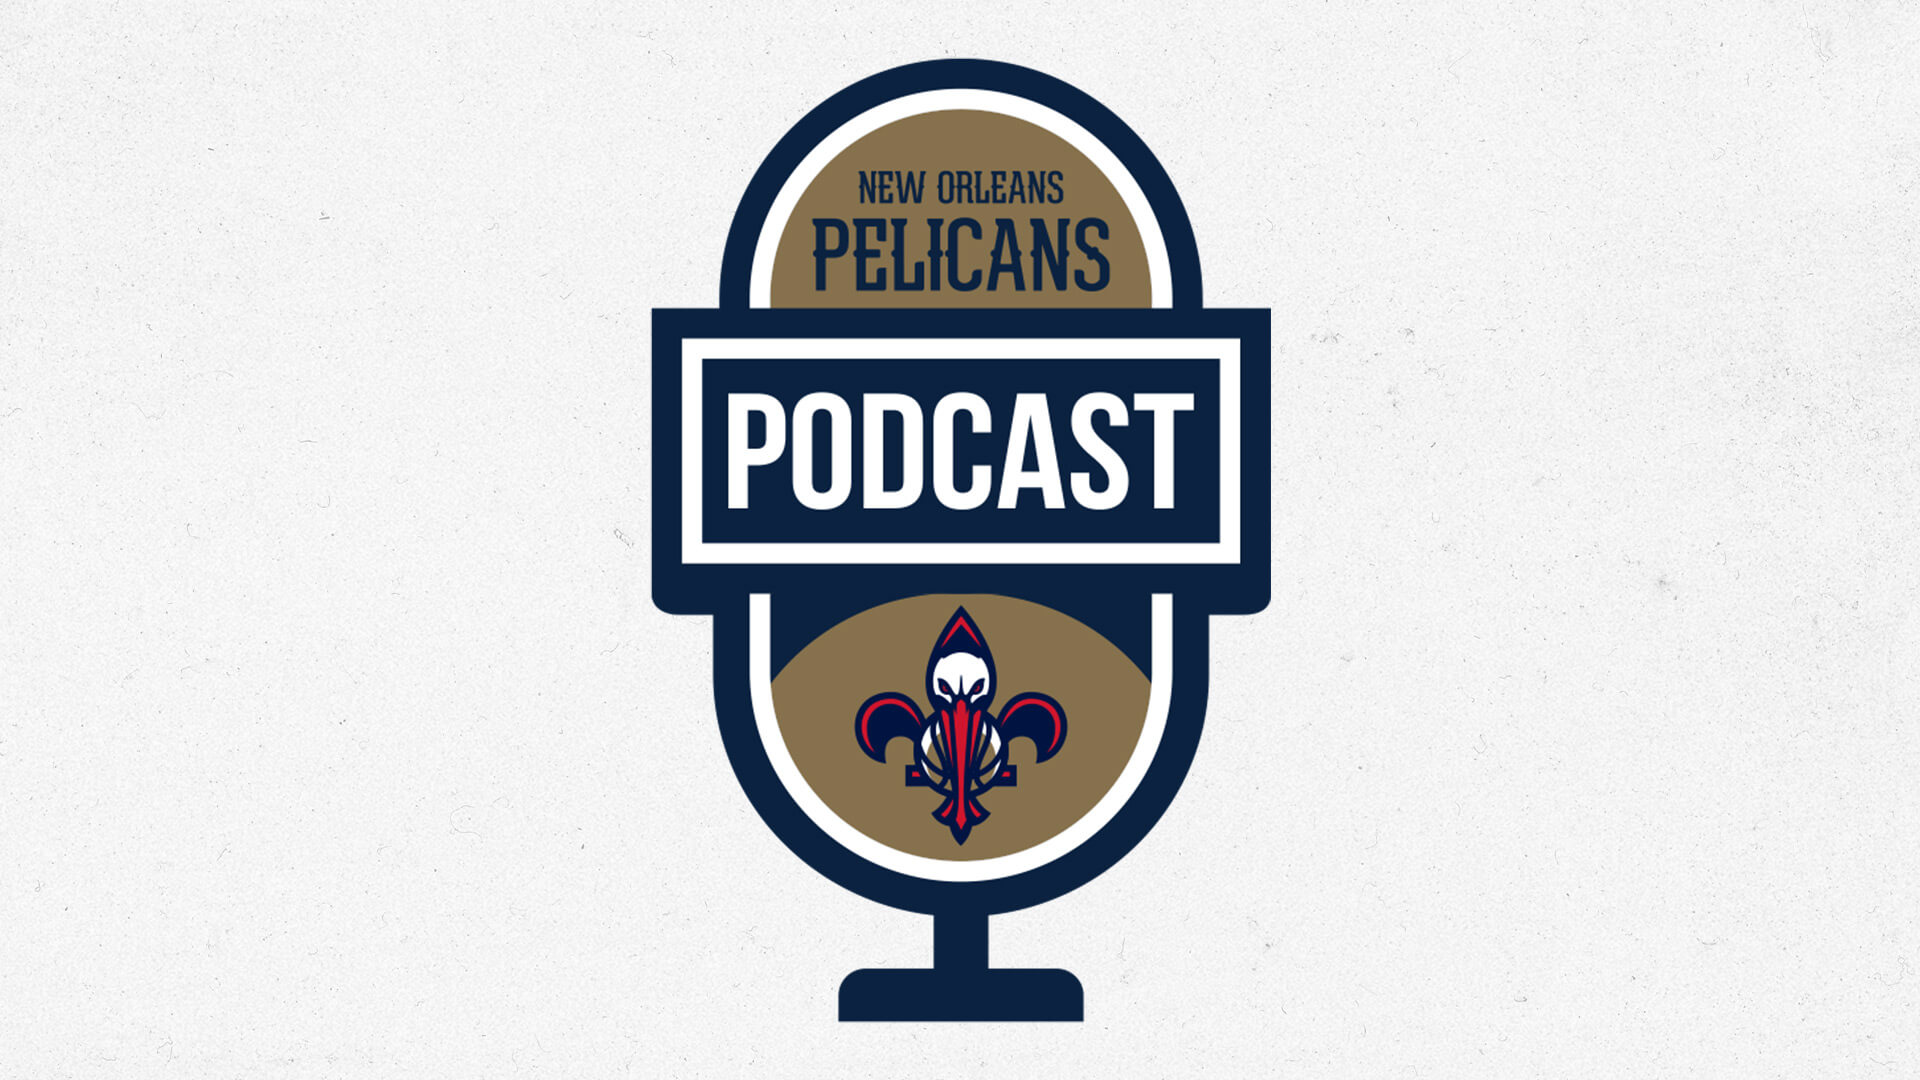 Oleh Kosel on Portland win, New Orleans fans, NBA Western Conference | Pelicans Podcast